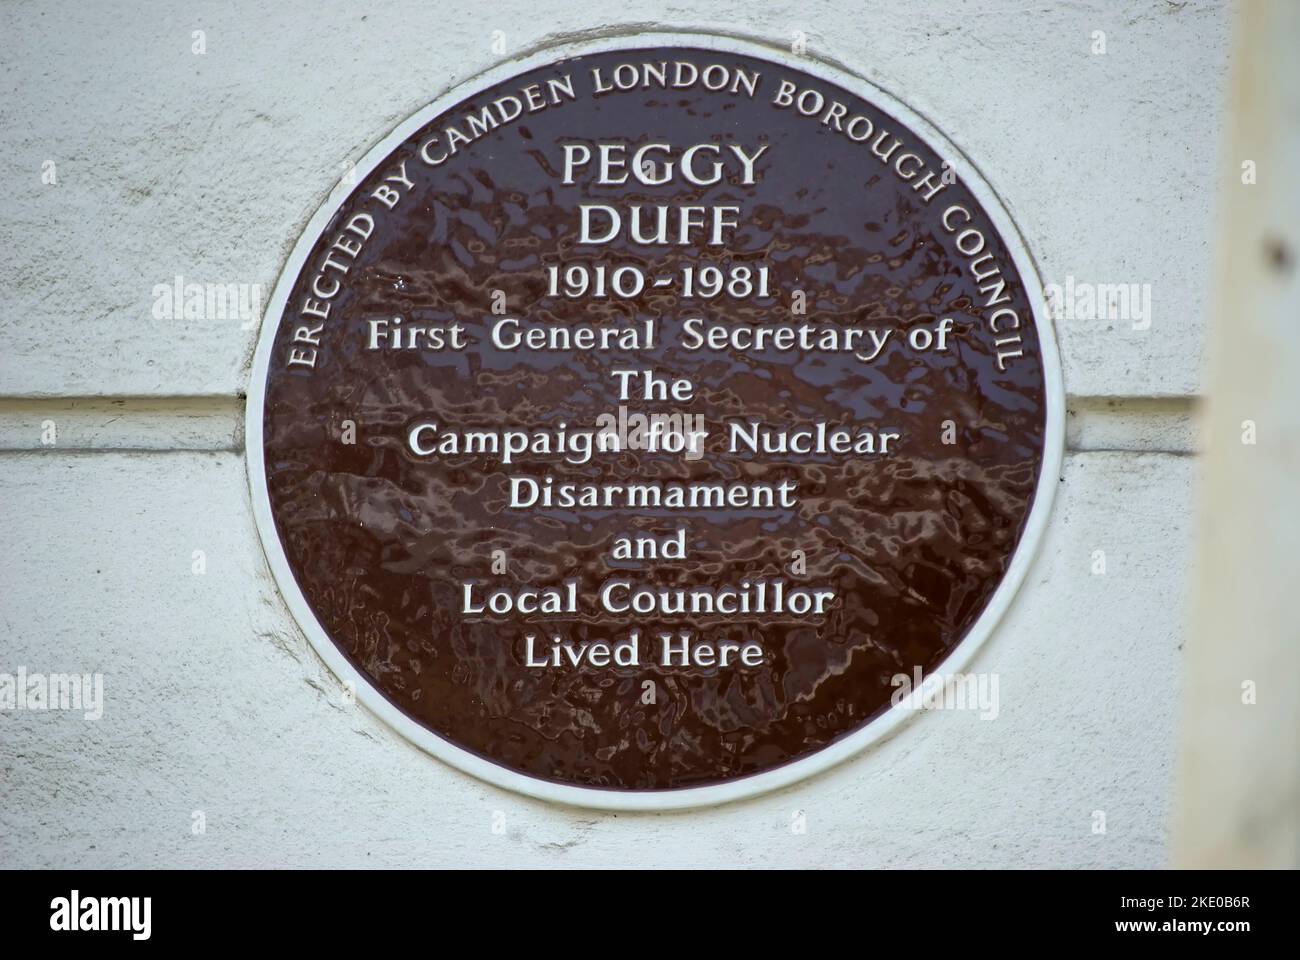 camden council plaque marking a home of first general secretary of cnd, peggy duff, camden, london, england Stock Photo